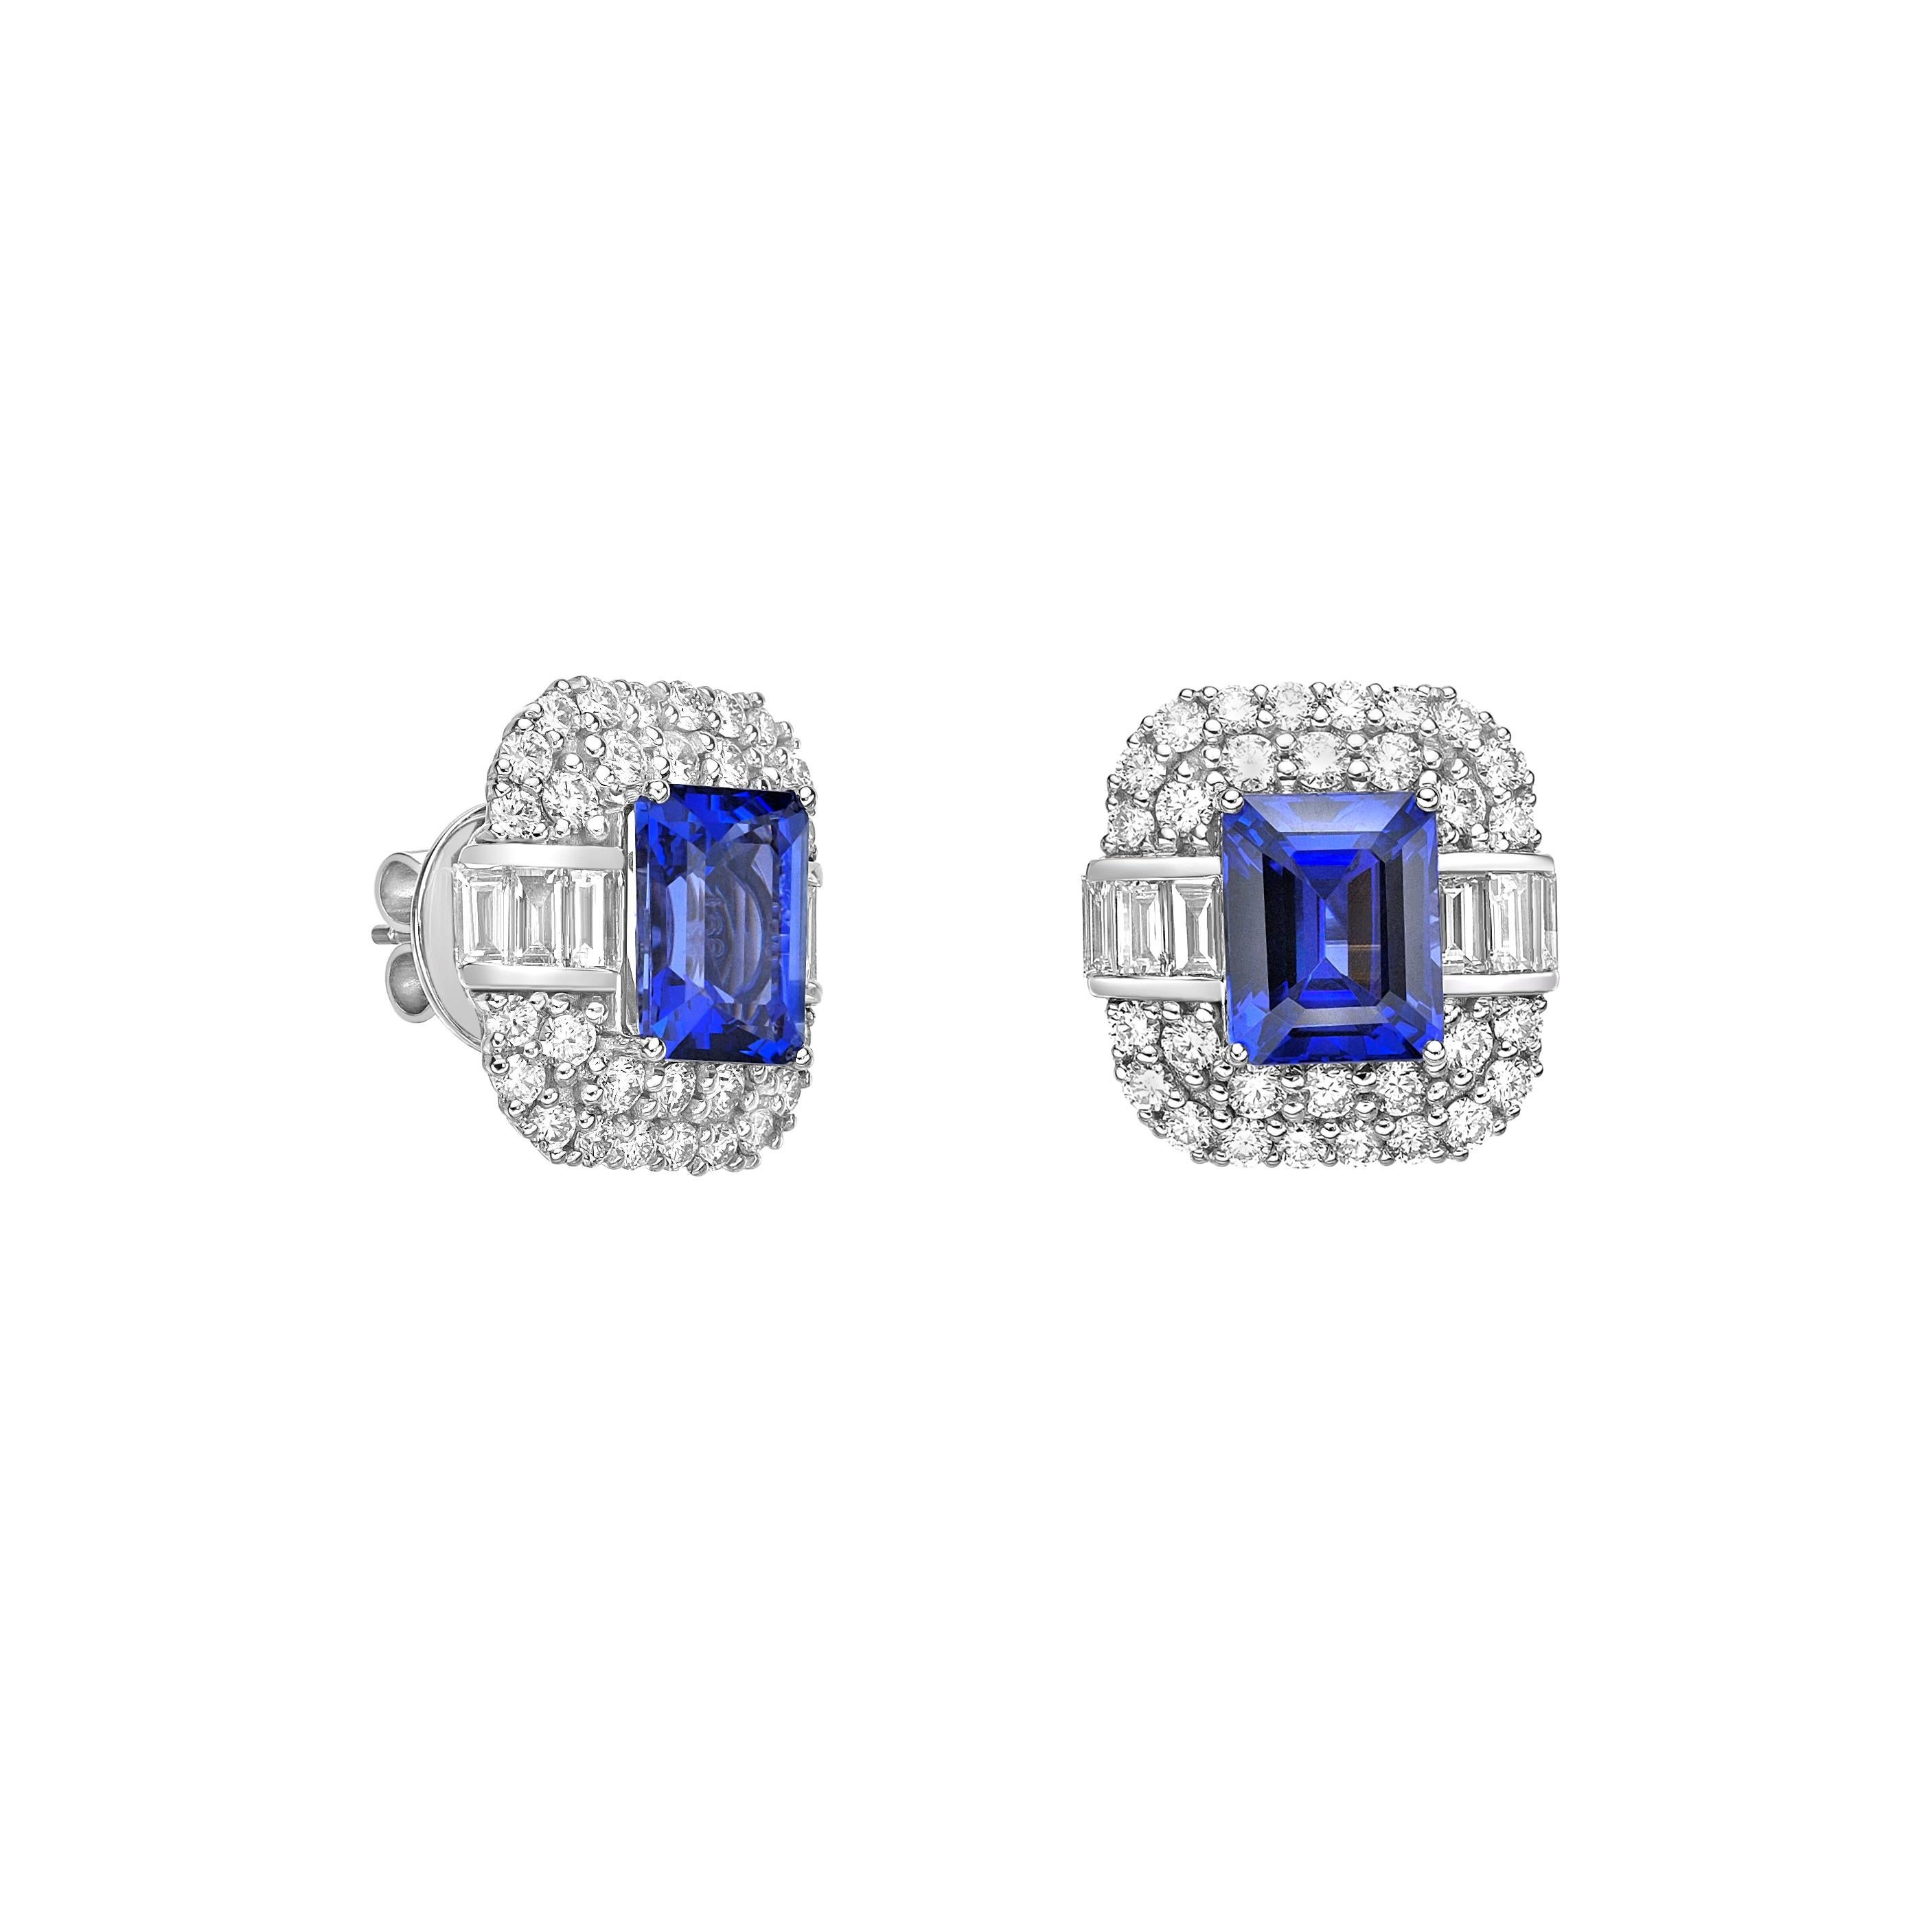 Contemporary Art Deco Style Tanzanite Stud Earrings with Diamond in 18 Karat White Gold For Sale